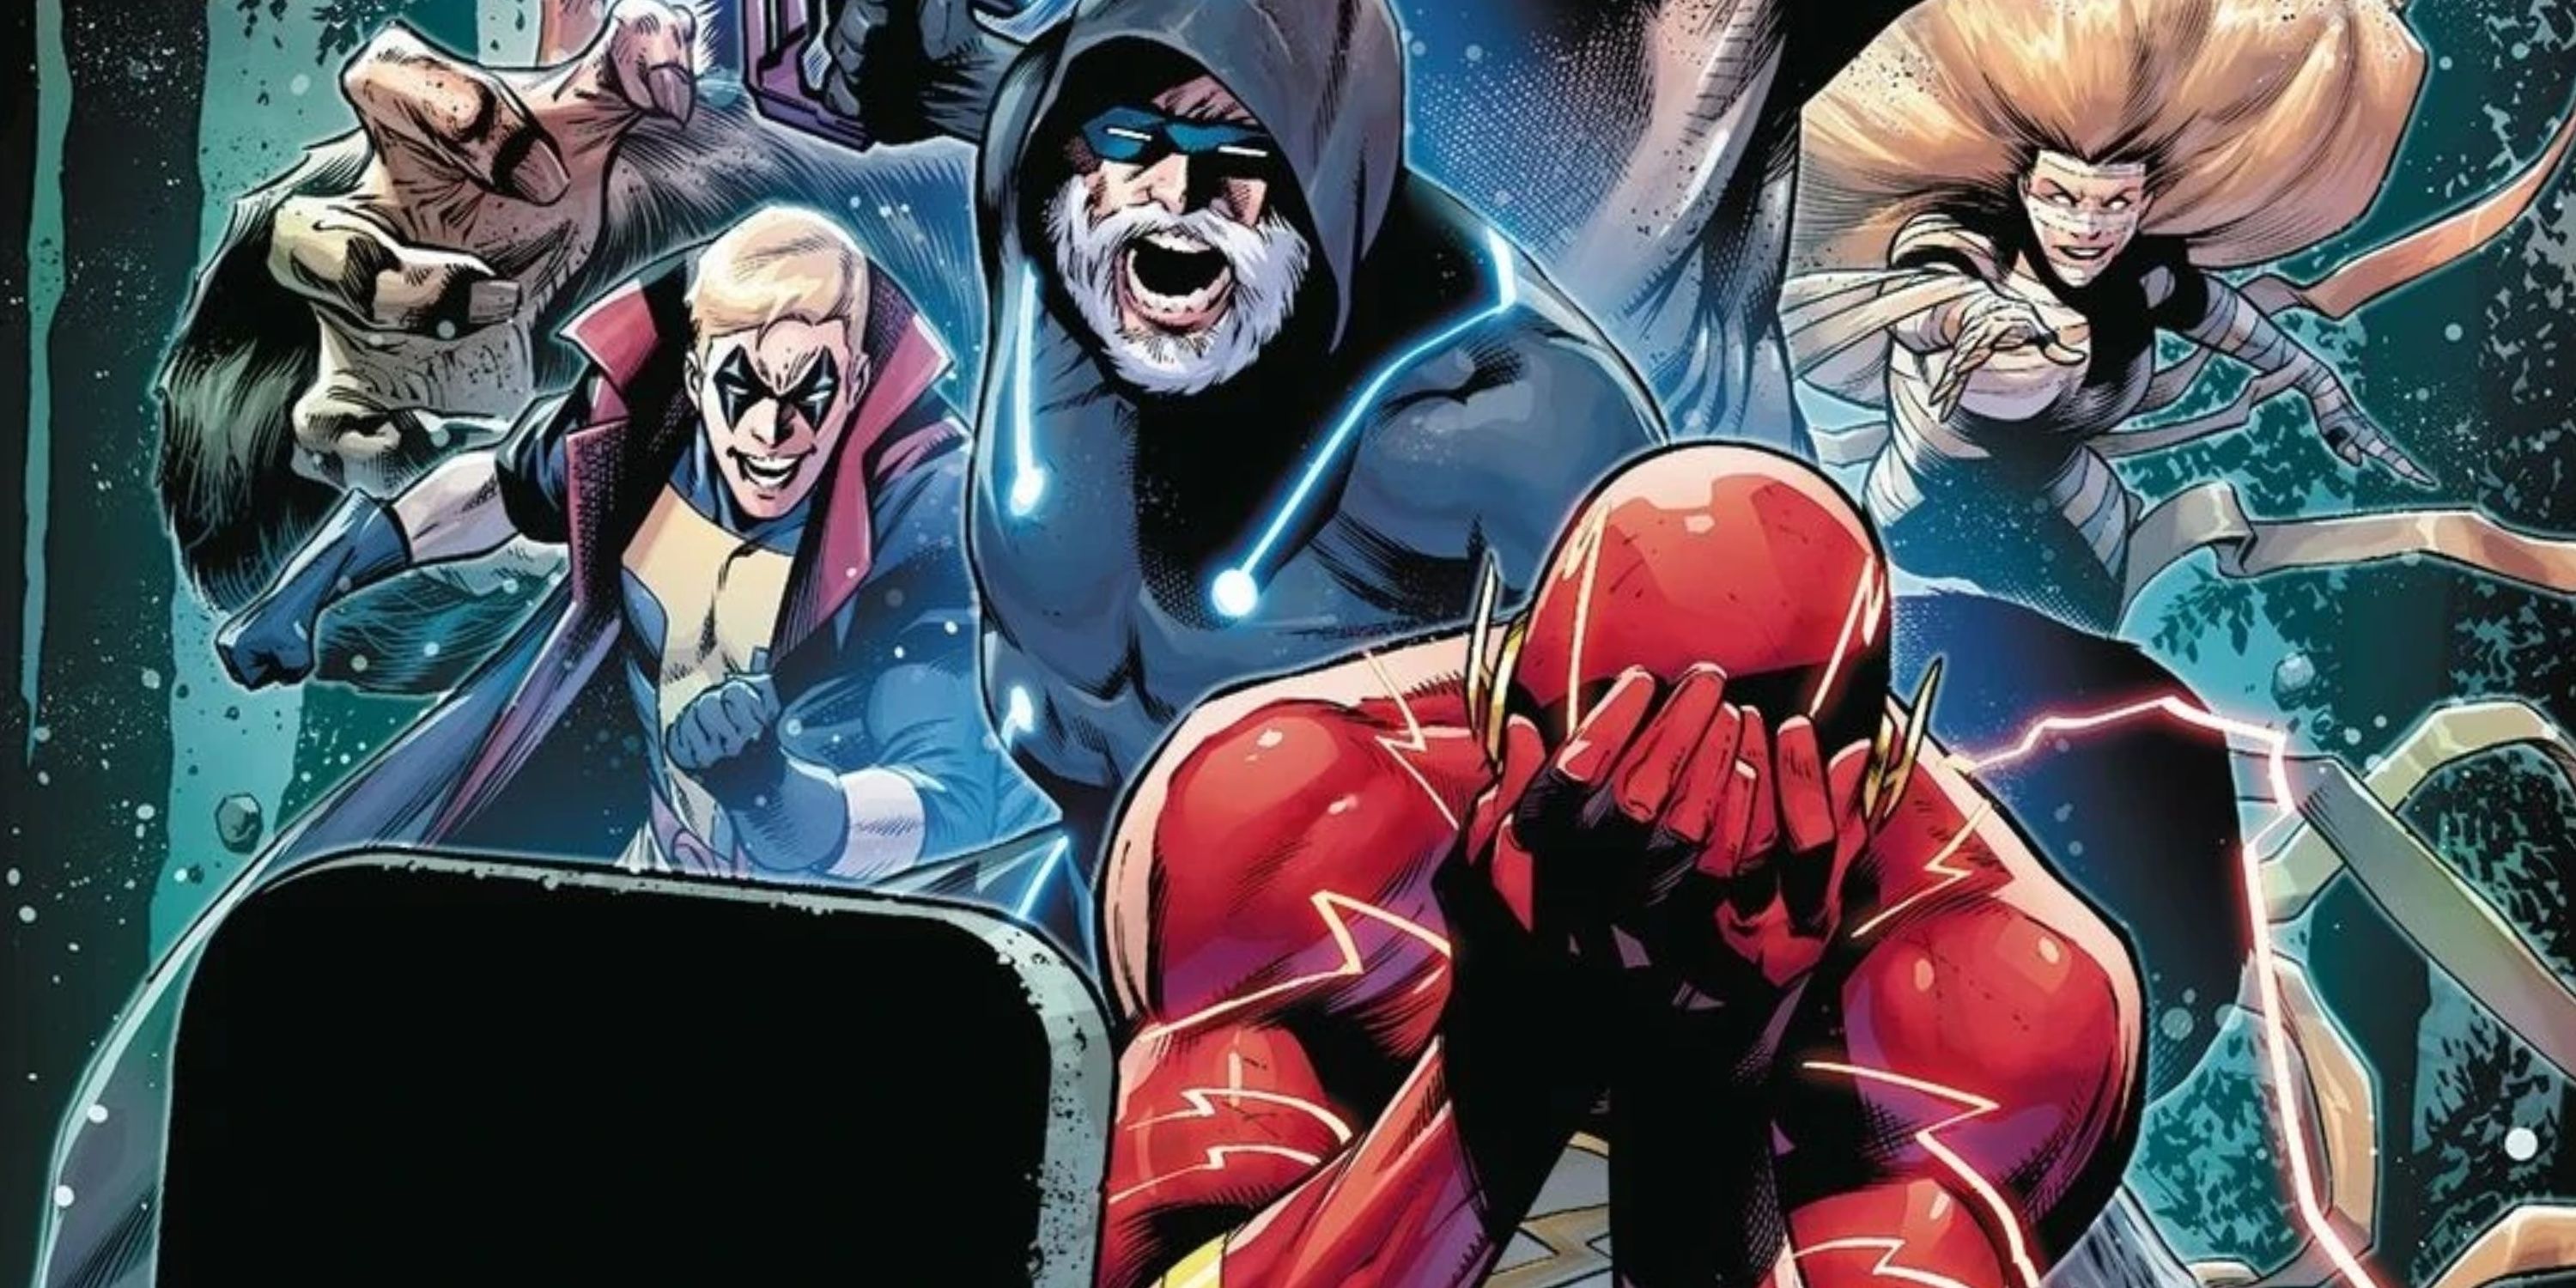 The cover to The Flash #756 from DC Comics, featuring the Flash despairing